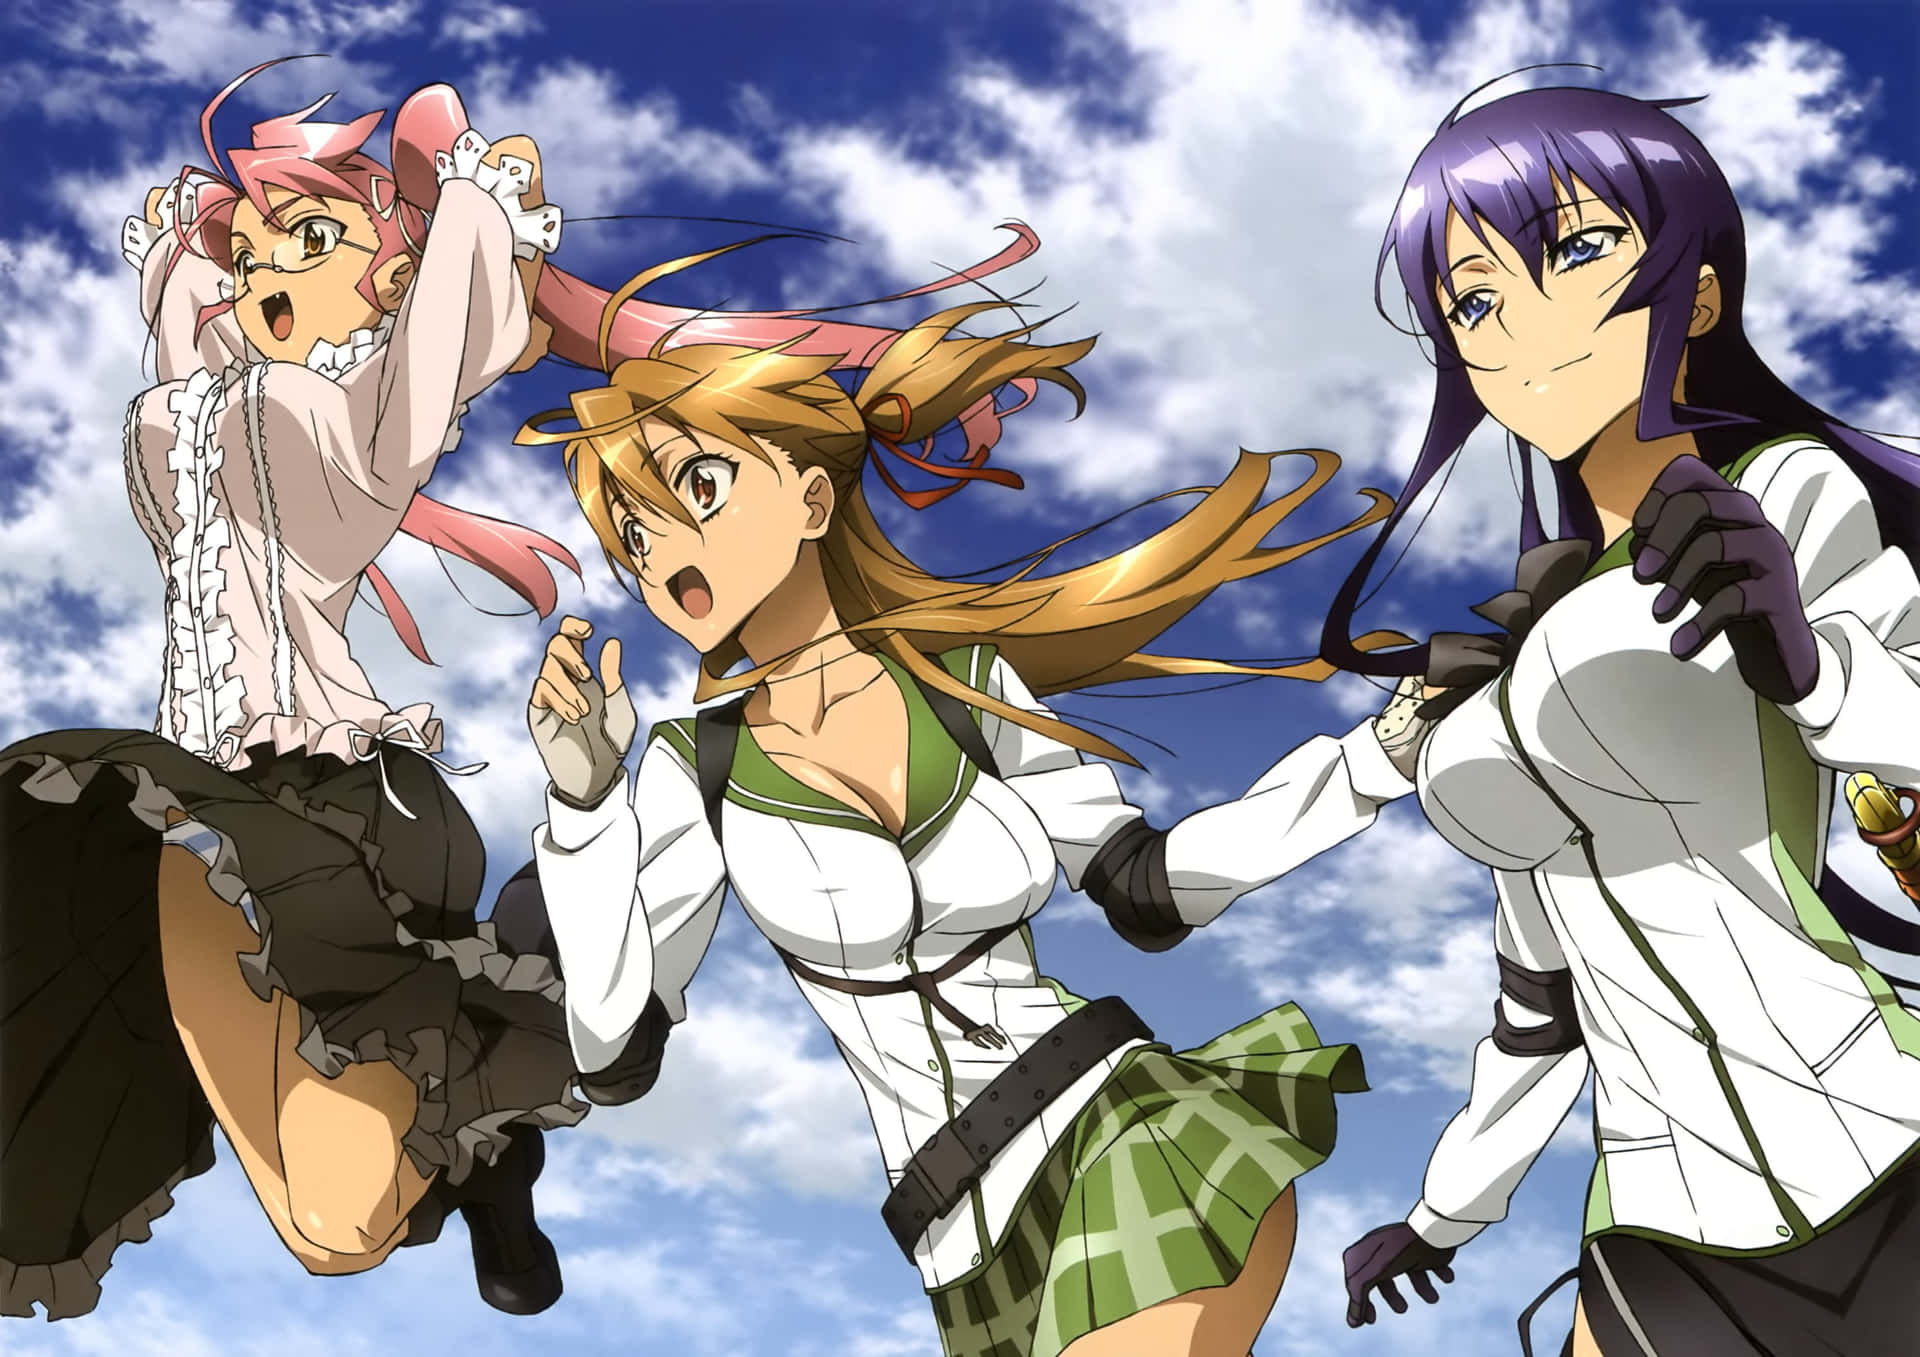 Saya Takagi, Showcasing Her Courage And Strategic Mind In The Hit Anime Series "high School Of The Dead". Wallpaper